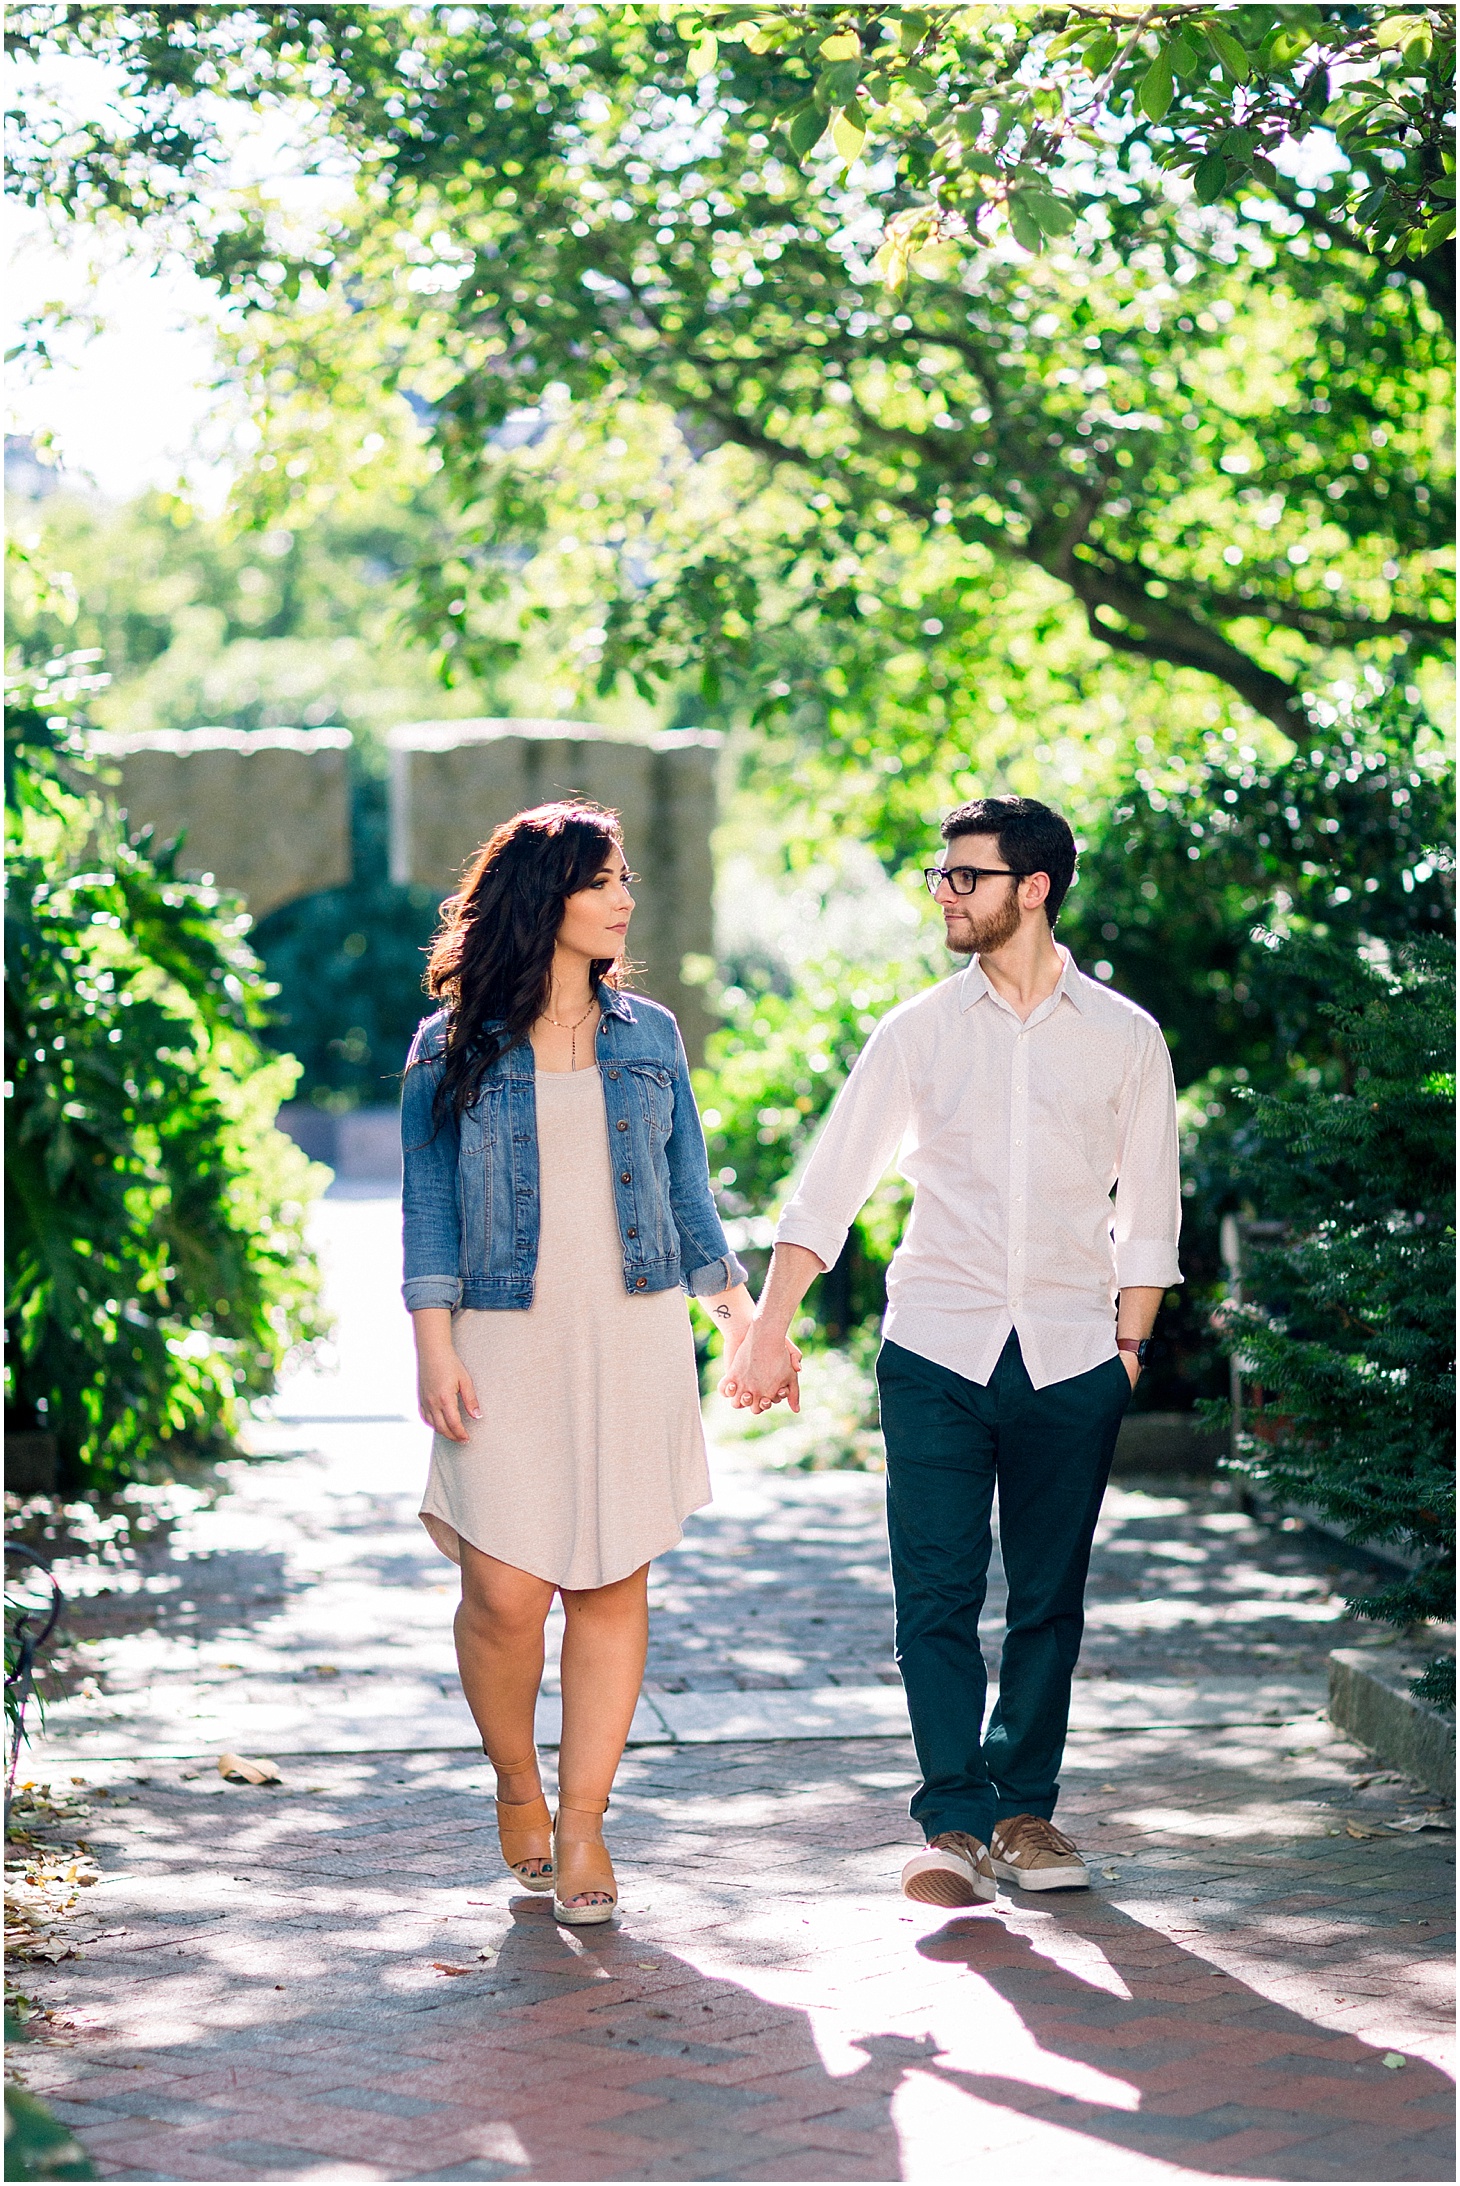 Engagement Portraits at the Smithsonian Gardens | Romantic Sunrise Engagement Session at the Smithsonian Gardens | Sarah Bradshaw Photography